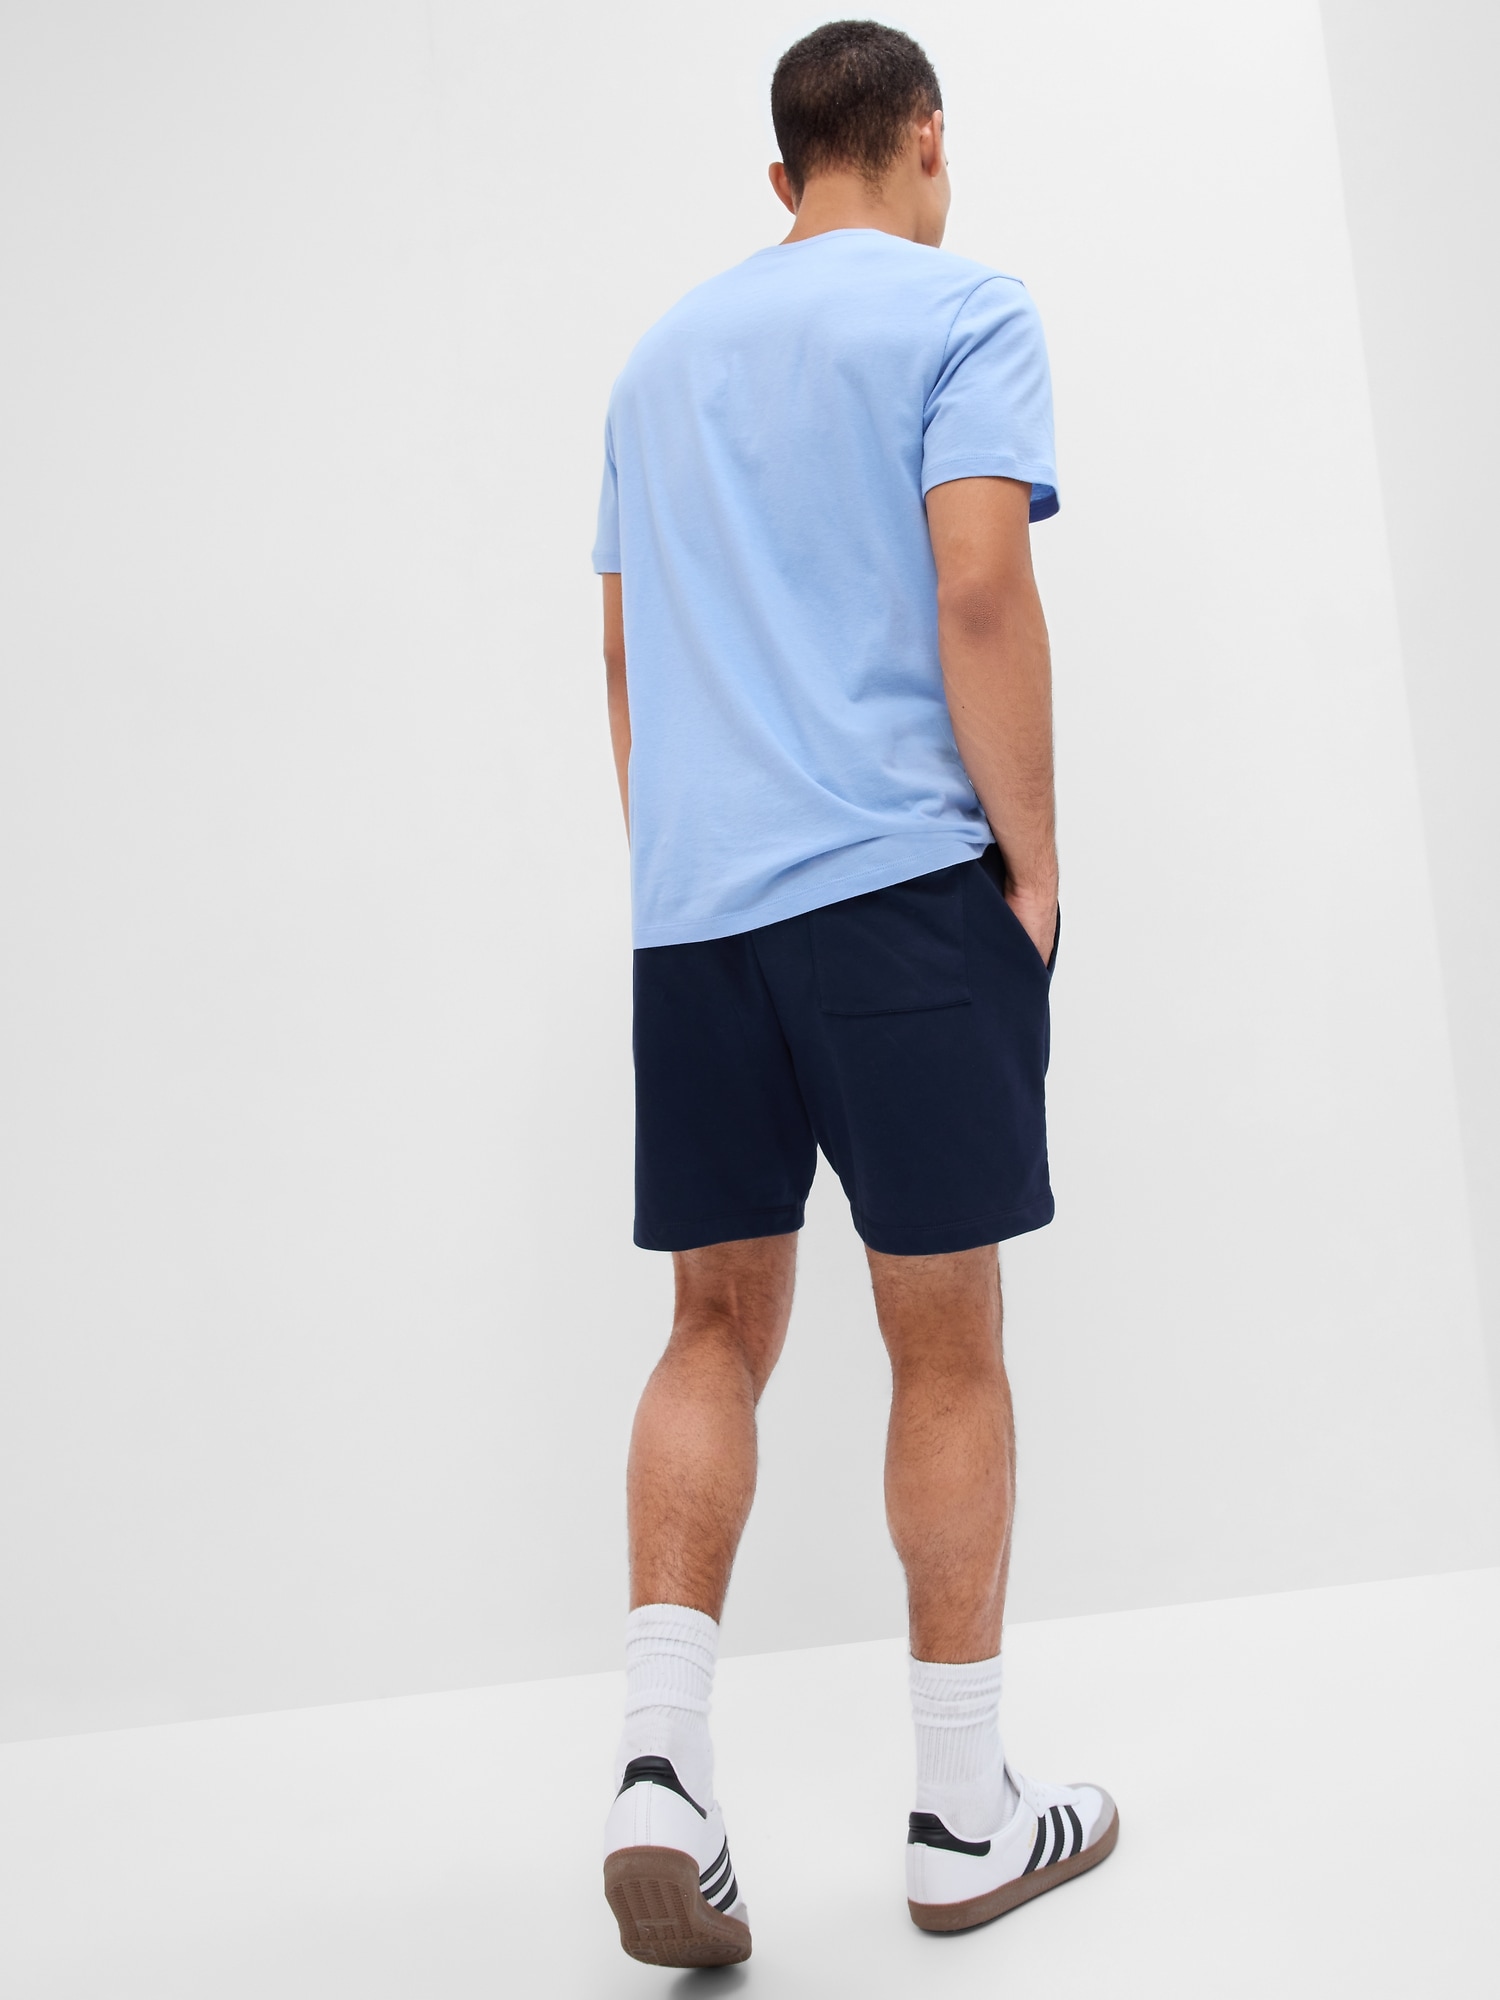 Shorts French | Gap Terry